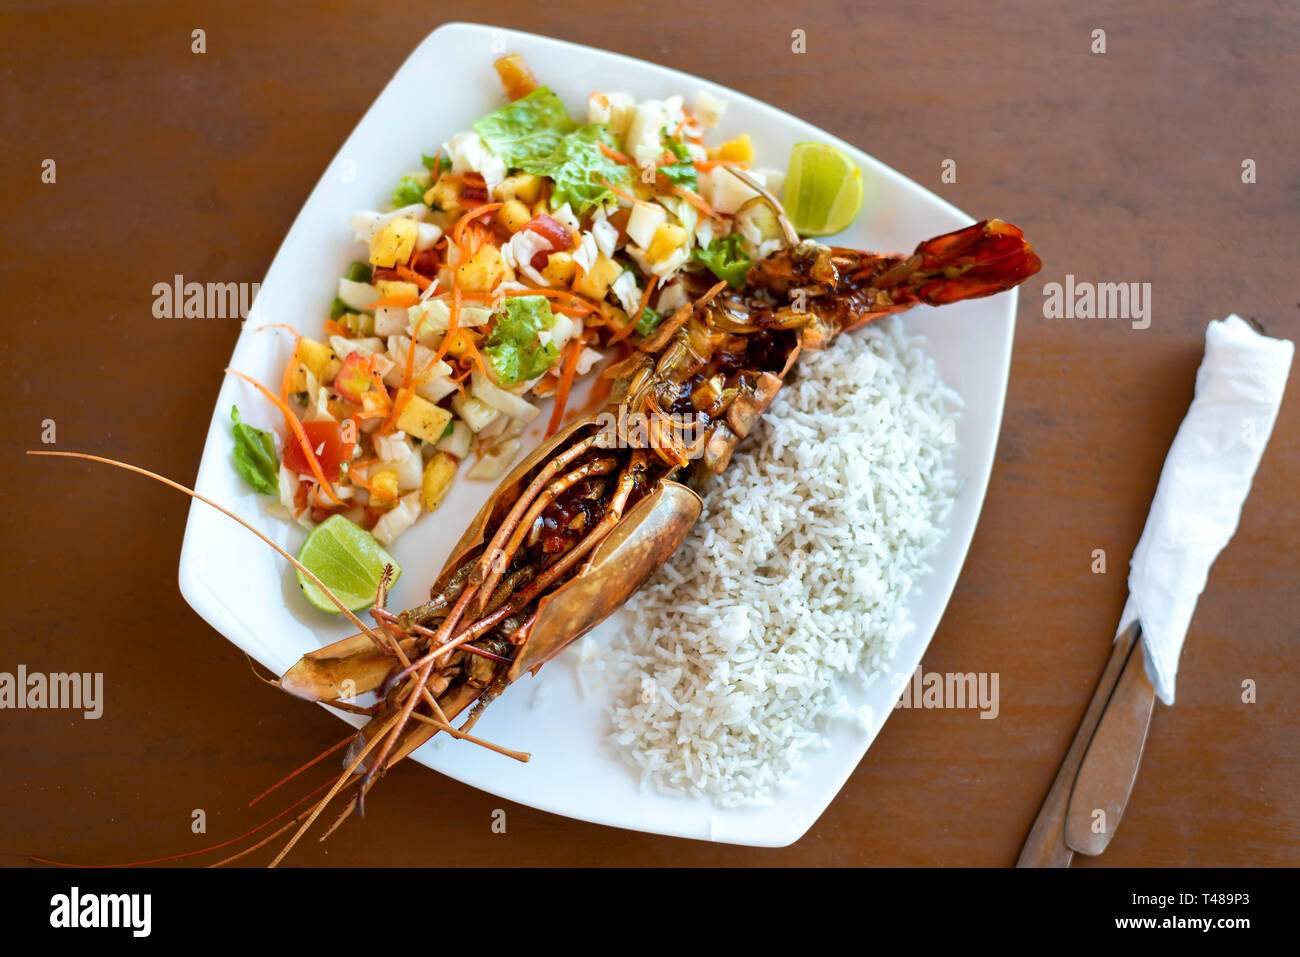 Jungle prawn with rice and salad on a plate Stock Photo